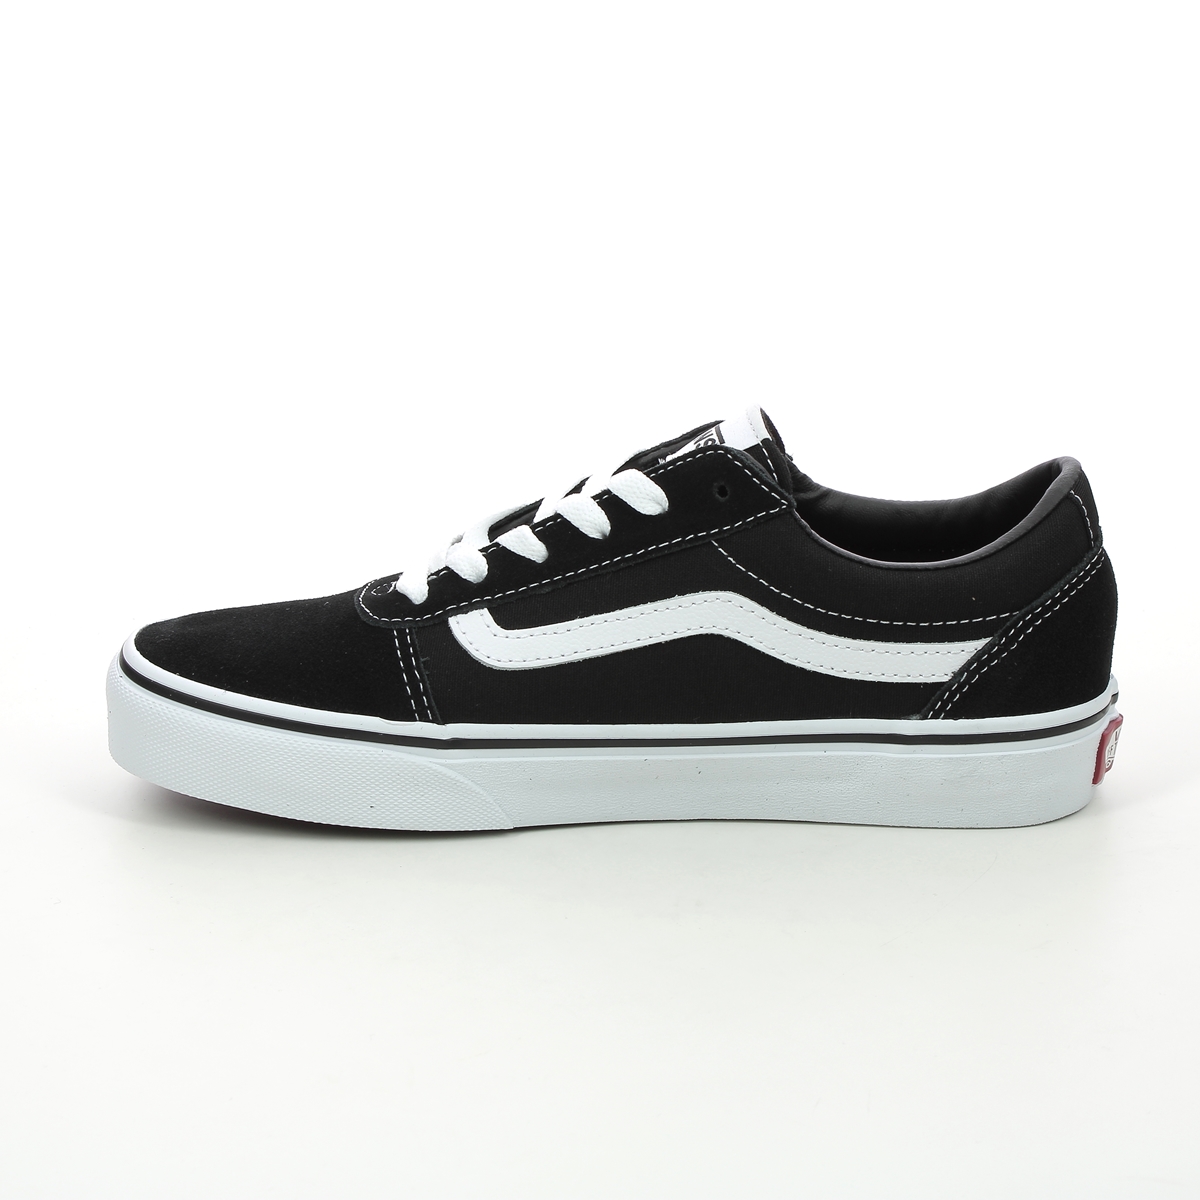 Buy > vans youth ward trainers > in stock